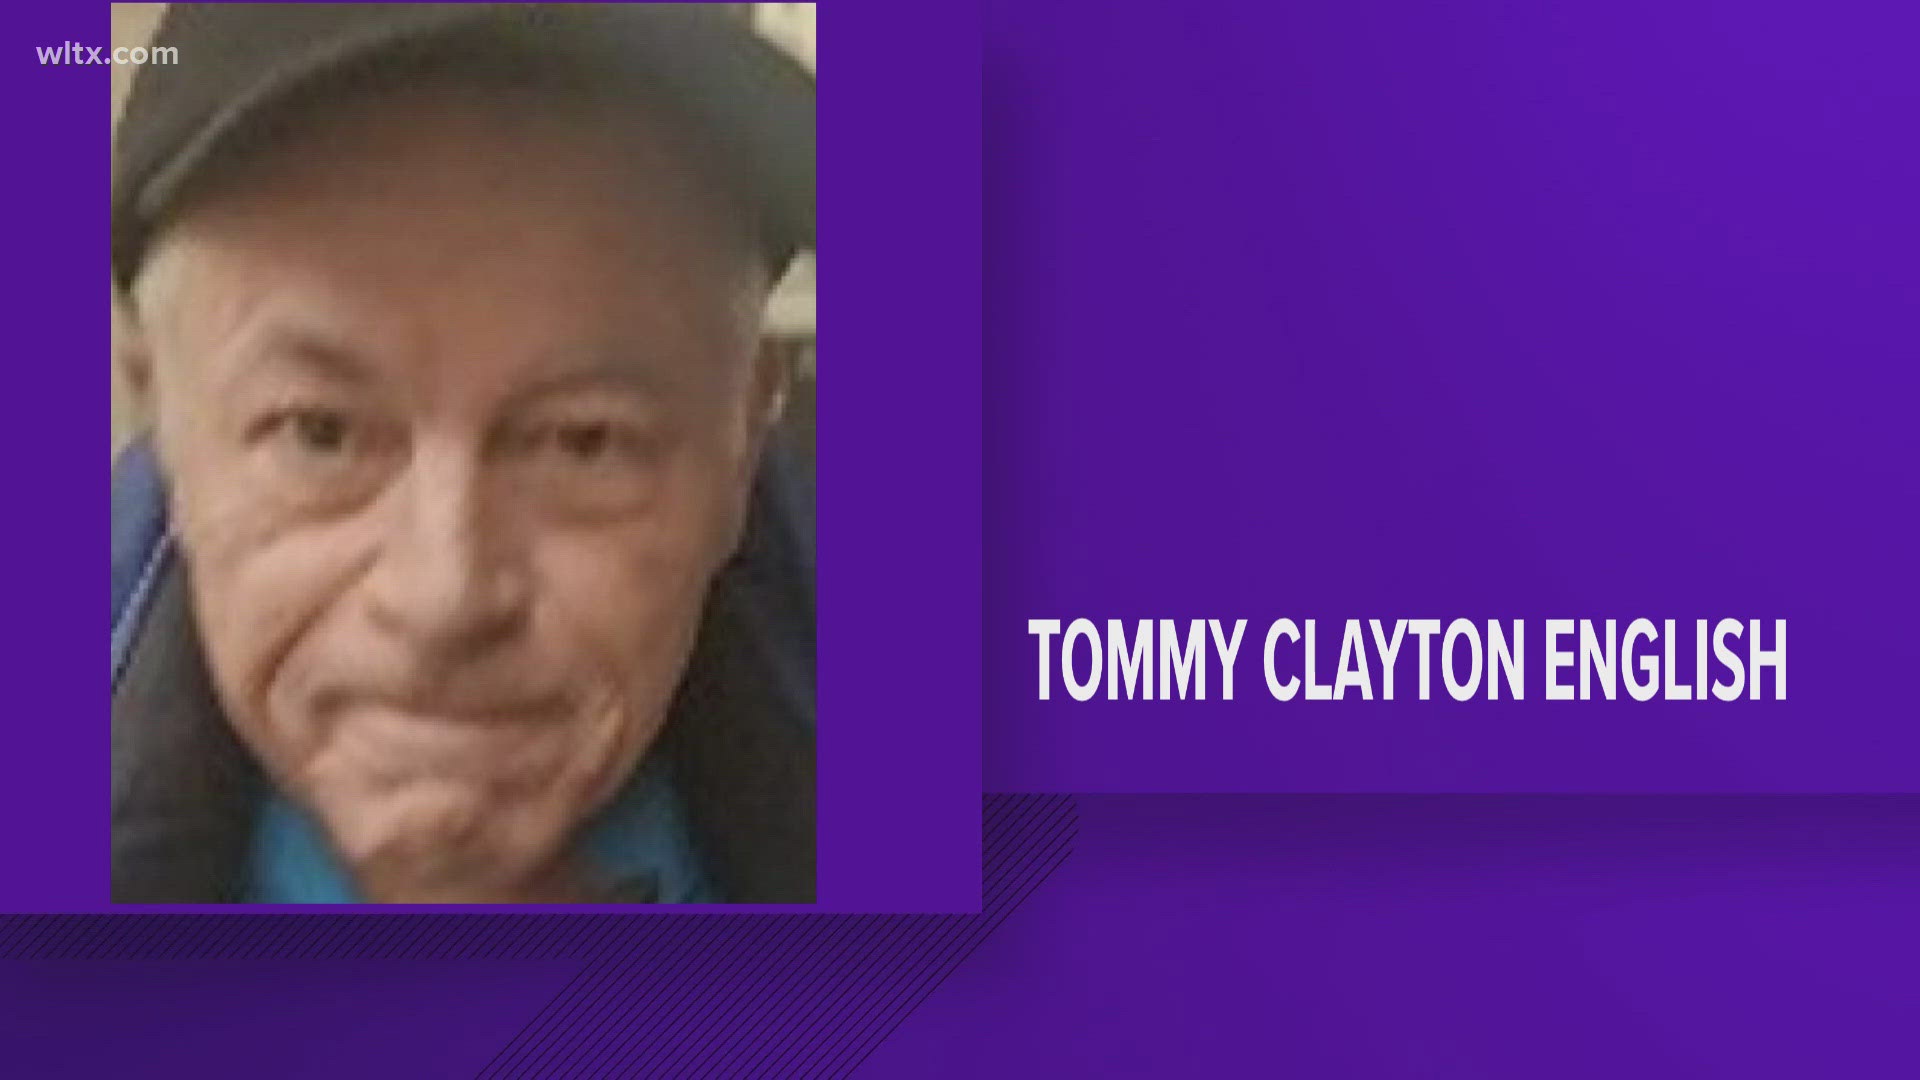 Tommy Clayton English, 65, was last heard from on May 20th.